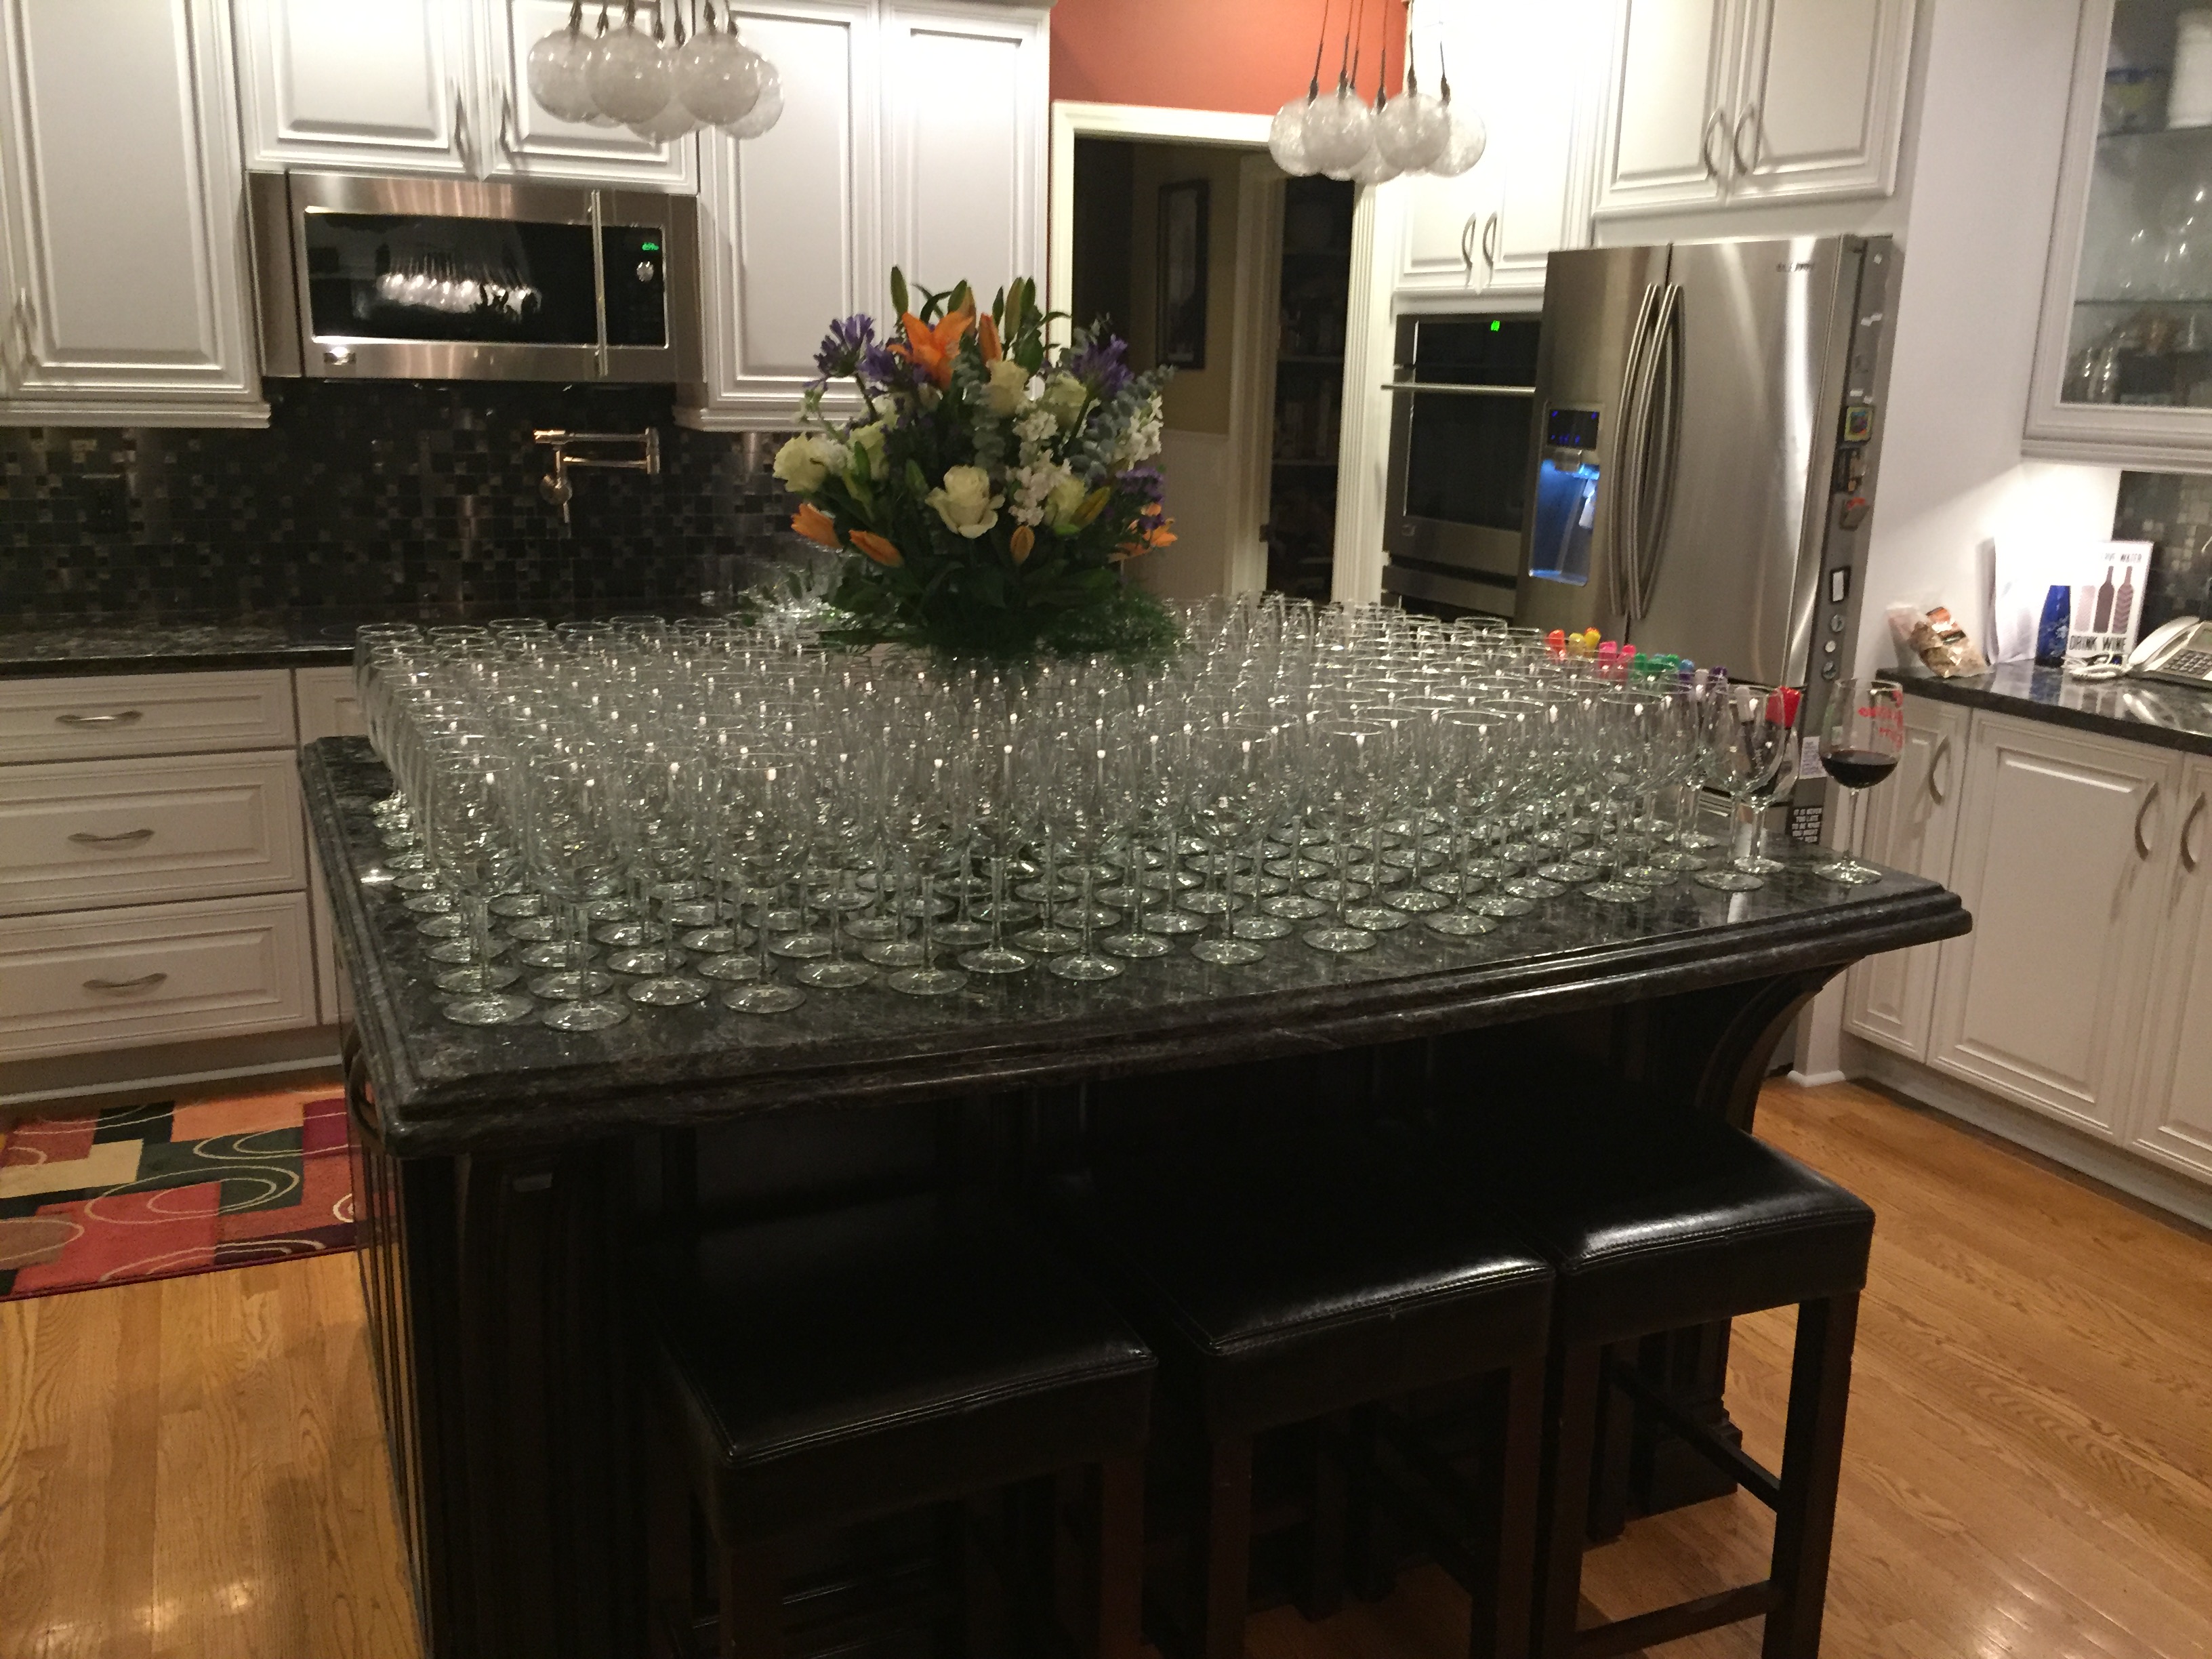 150 wine glasses, waiting for guests to arrive